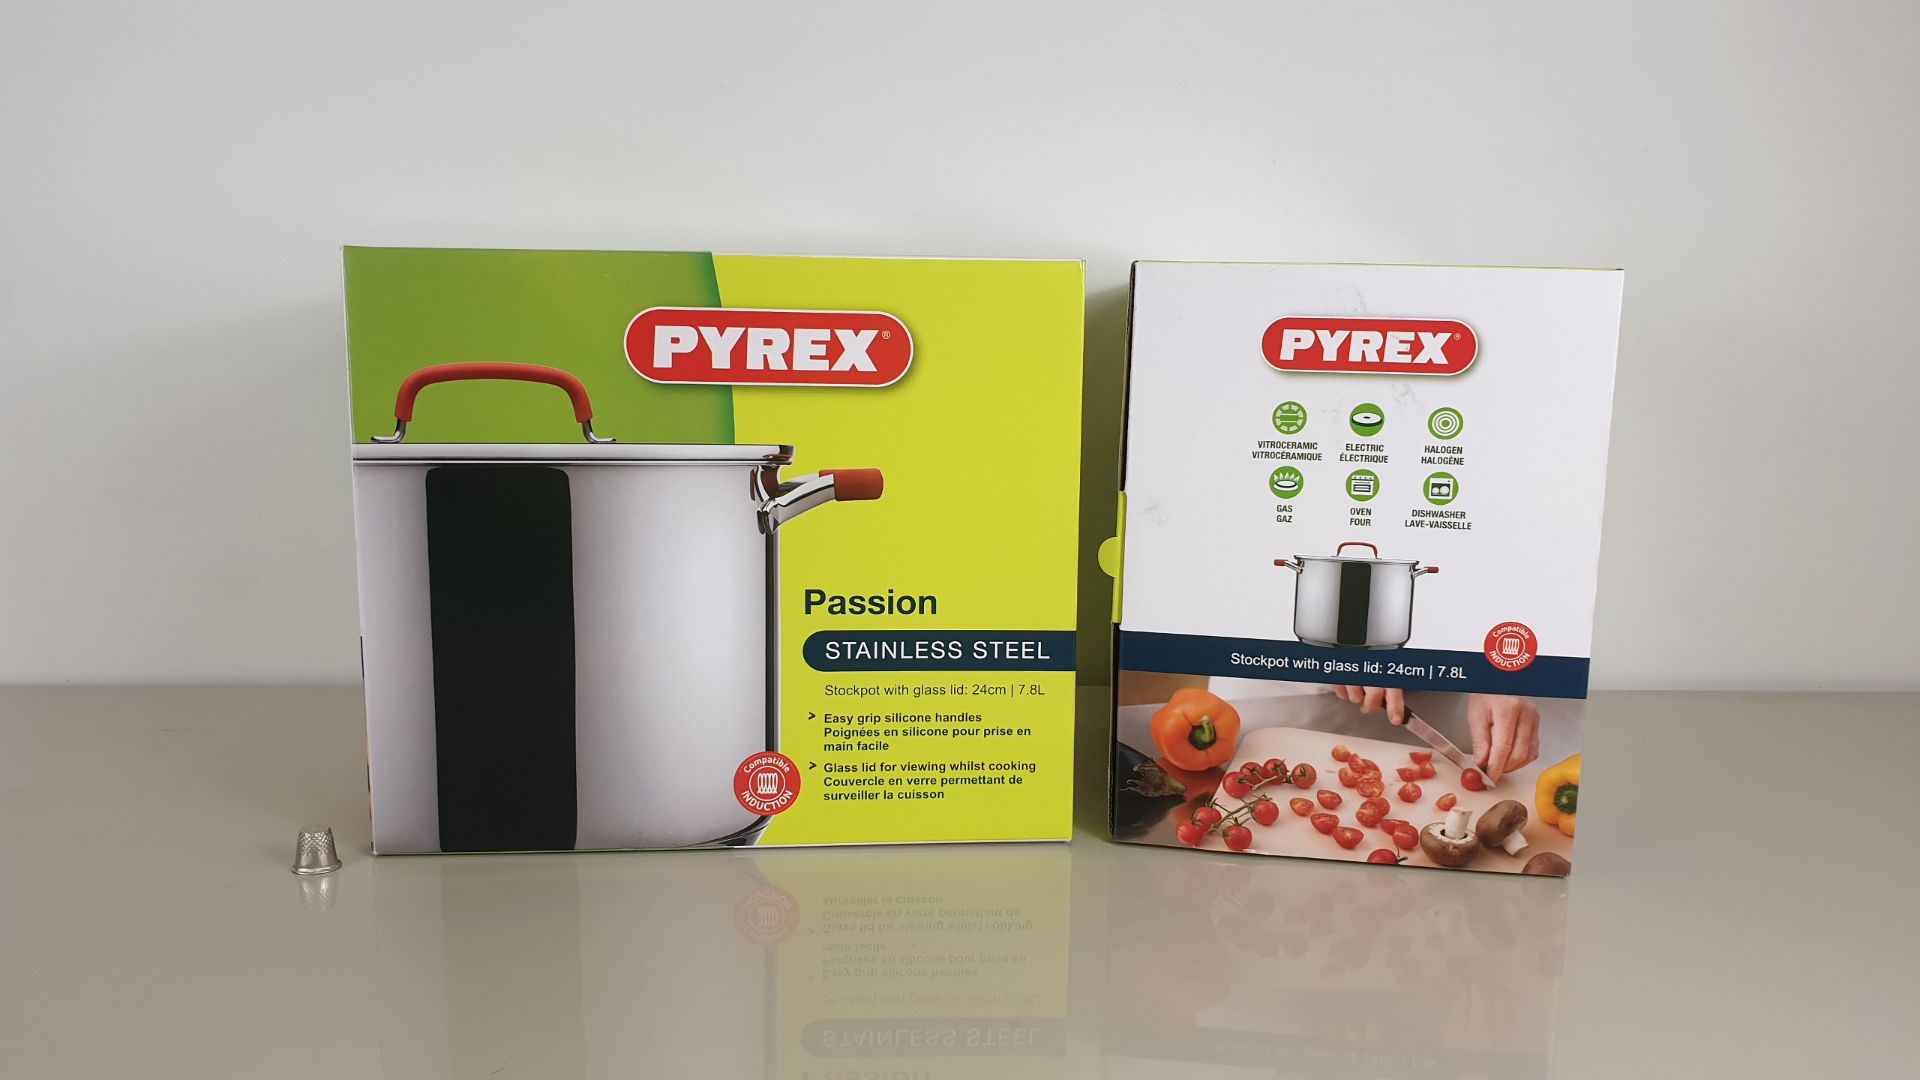 6 X PYREX PASSION STAINLESS STEEL STOCKPOTS WITH GLASS LIDS 24CM 7.8 LITRE CAPACITY - IN 3 CARTONS